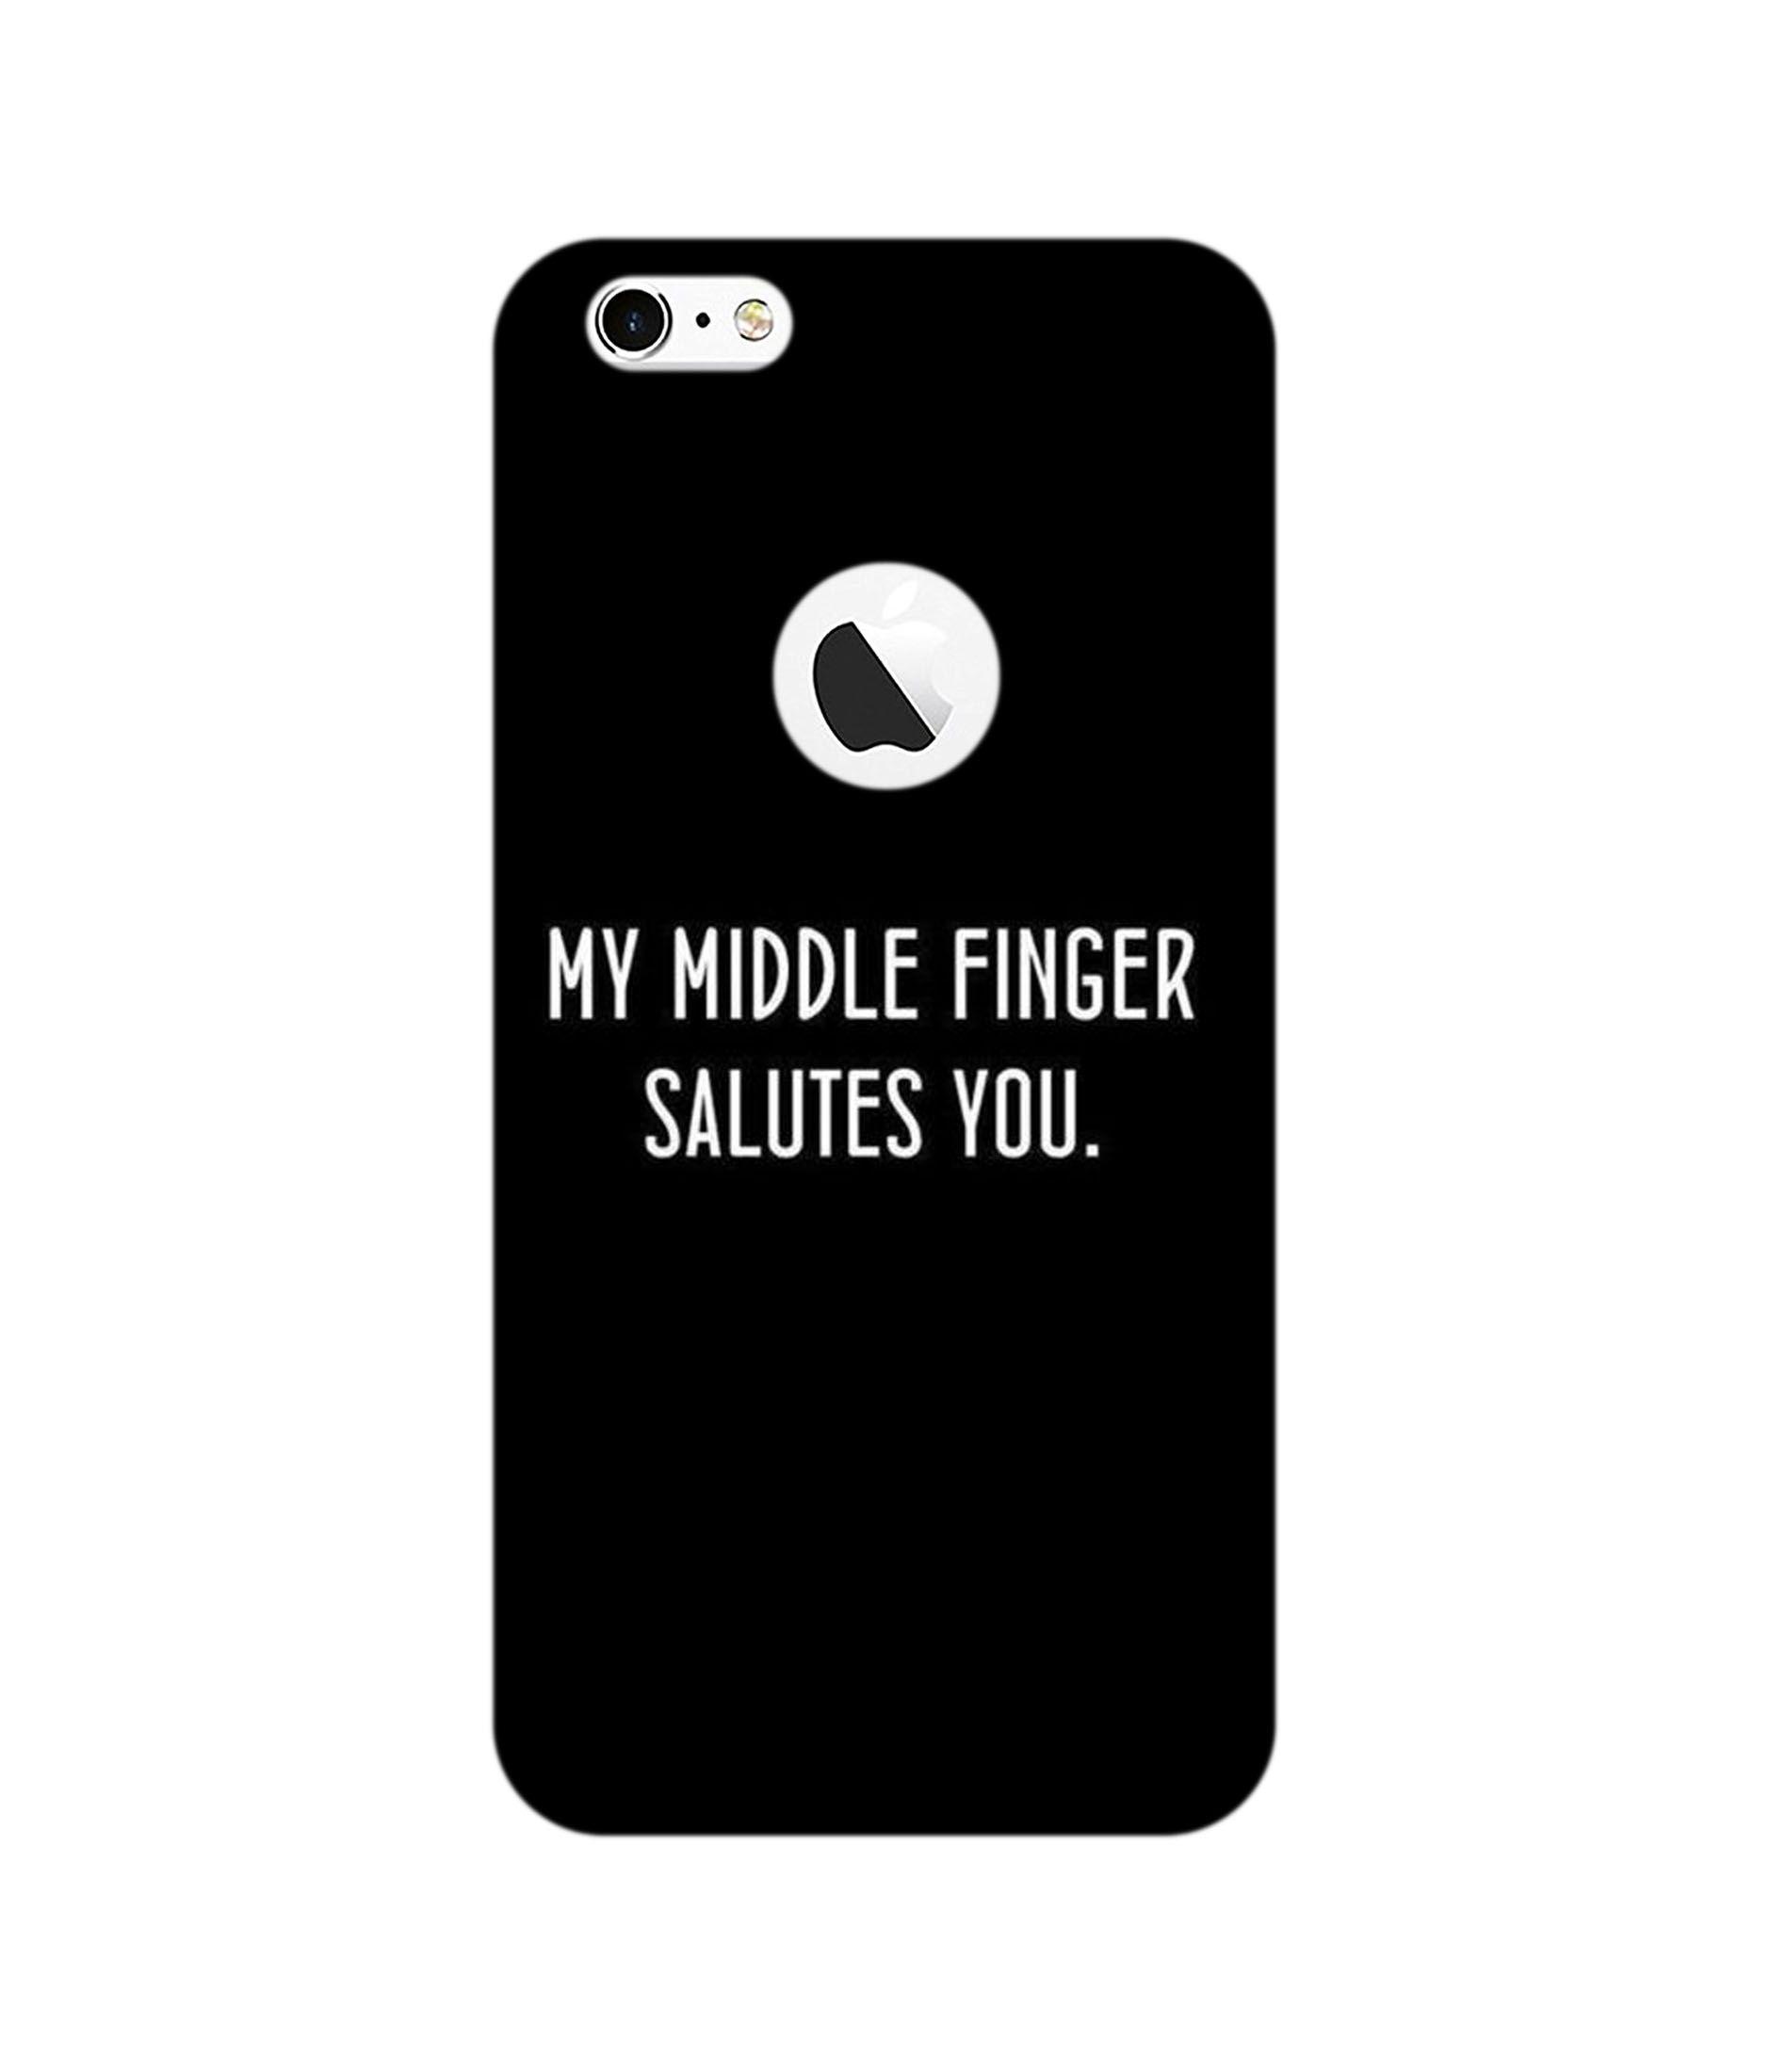 6s Logo - my middle finger Phone Case for iPhone 6/6s (Logo Cut)